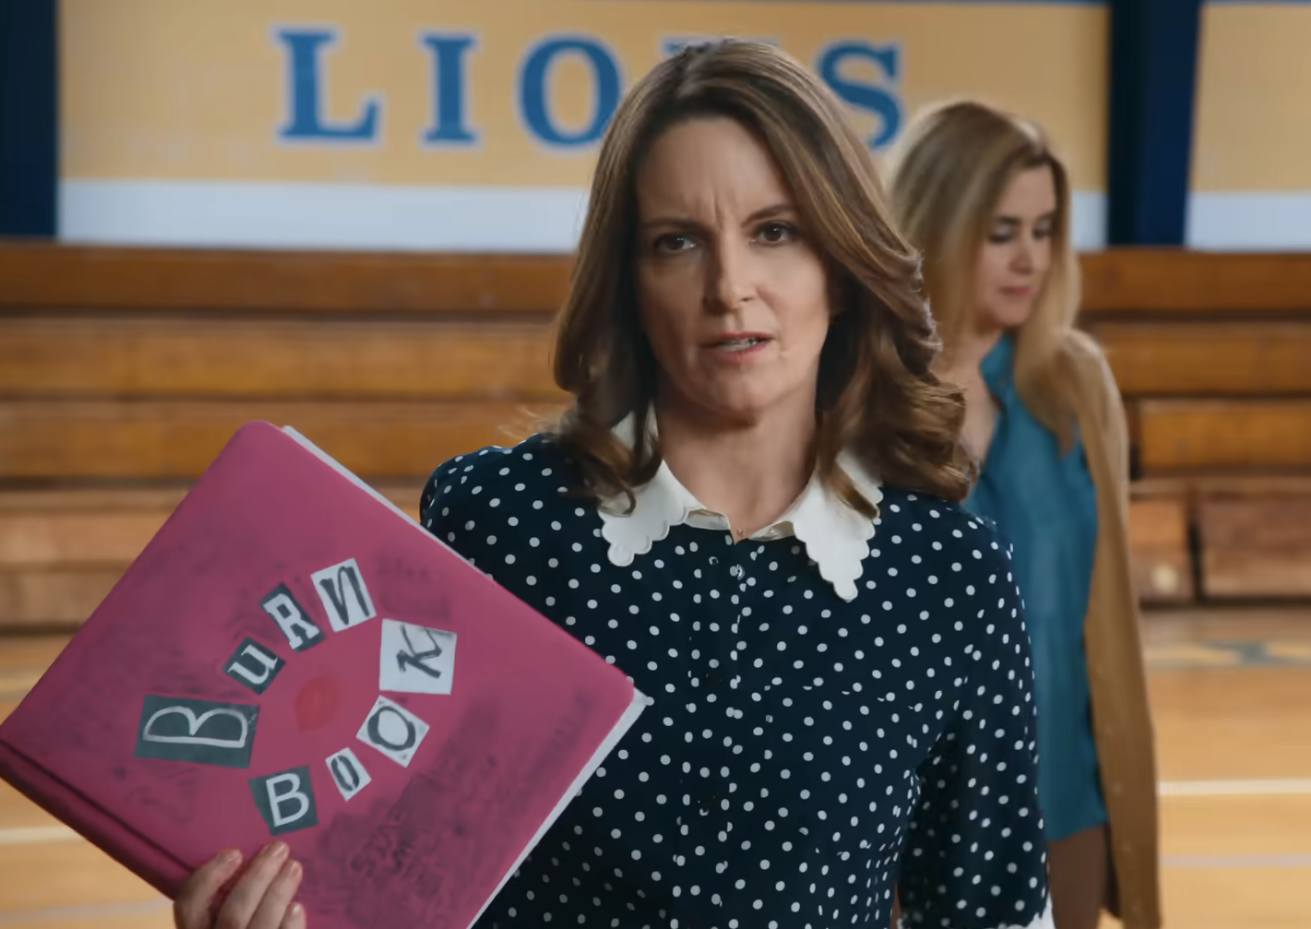 tina holding the burn book in a the gym